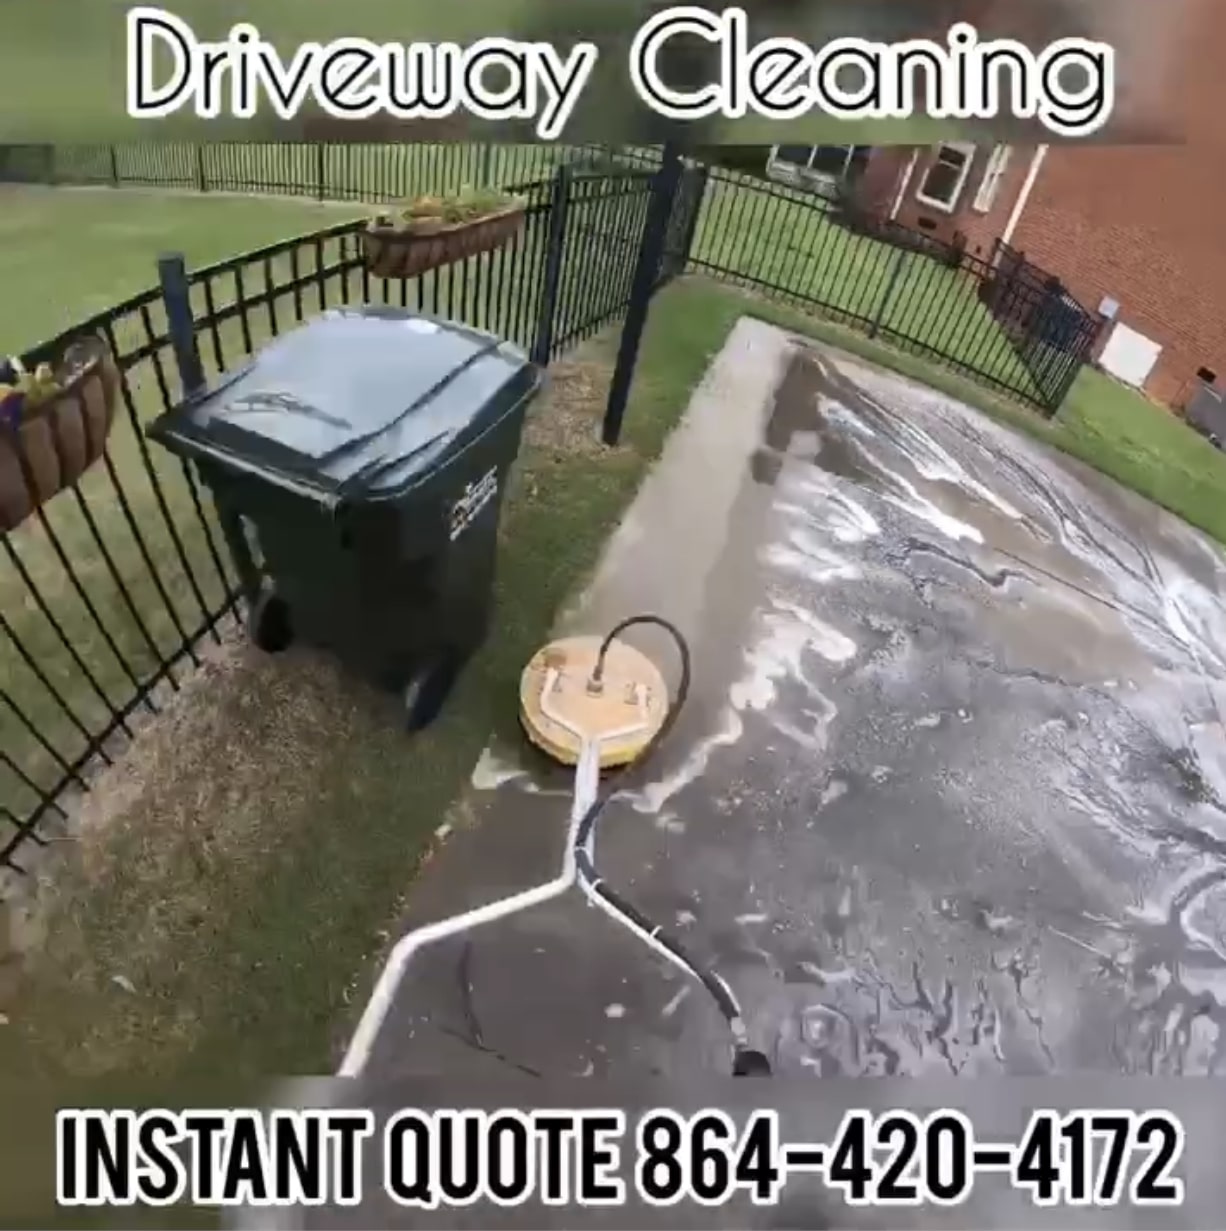 Driveway clean instant